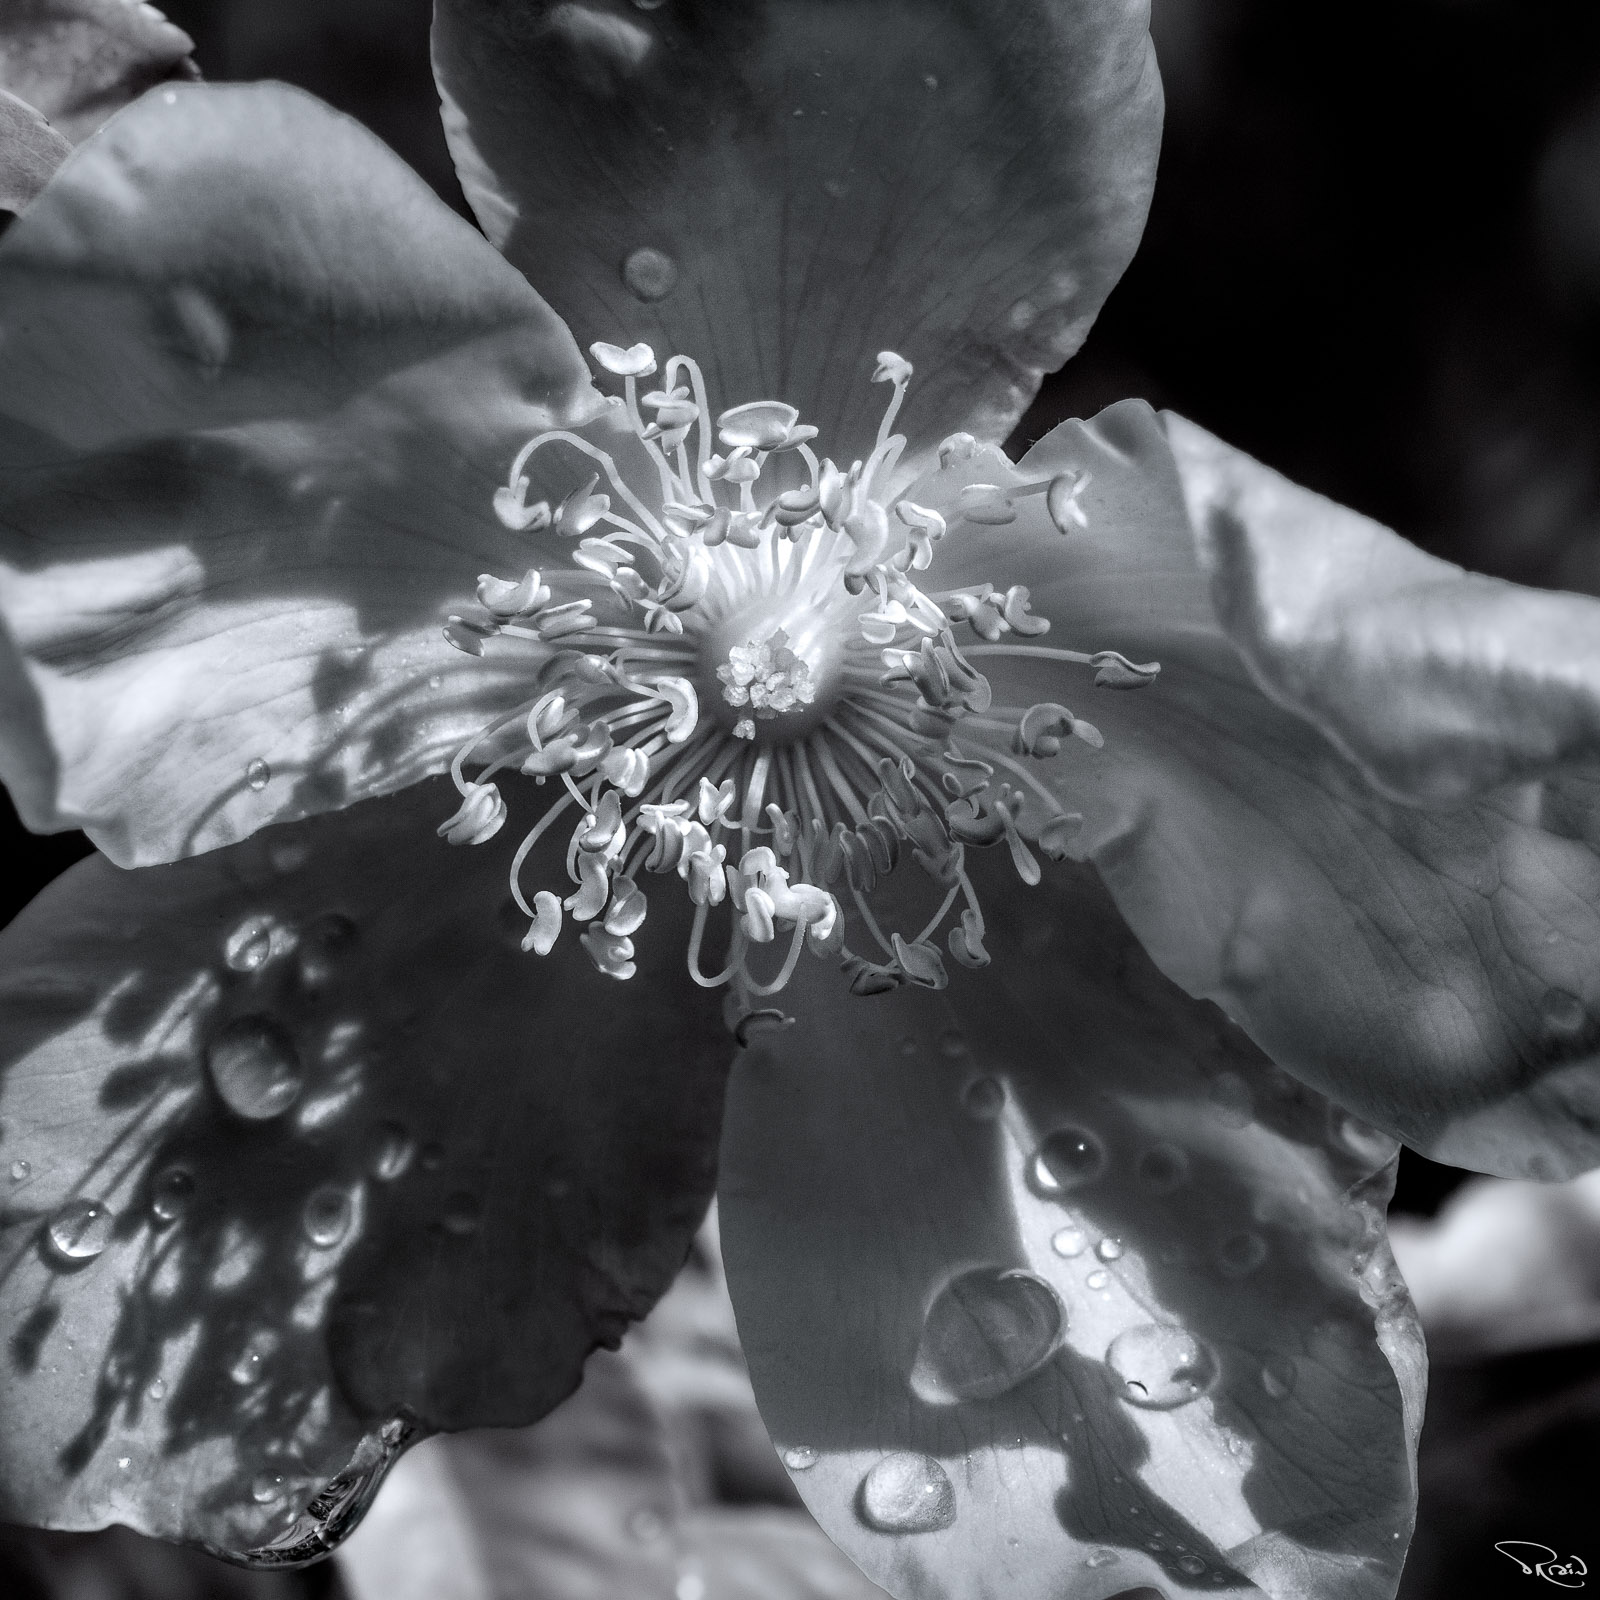 A black-and-white macro image of a single-petal rose shows a detailed view of sunlit raindrops on a delicate blossom.